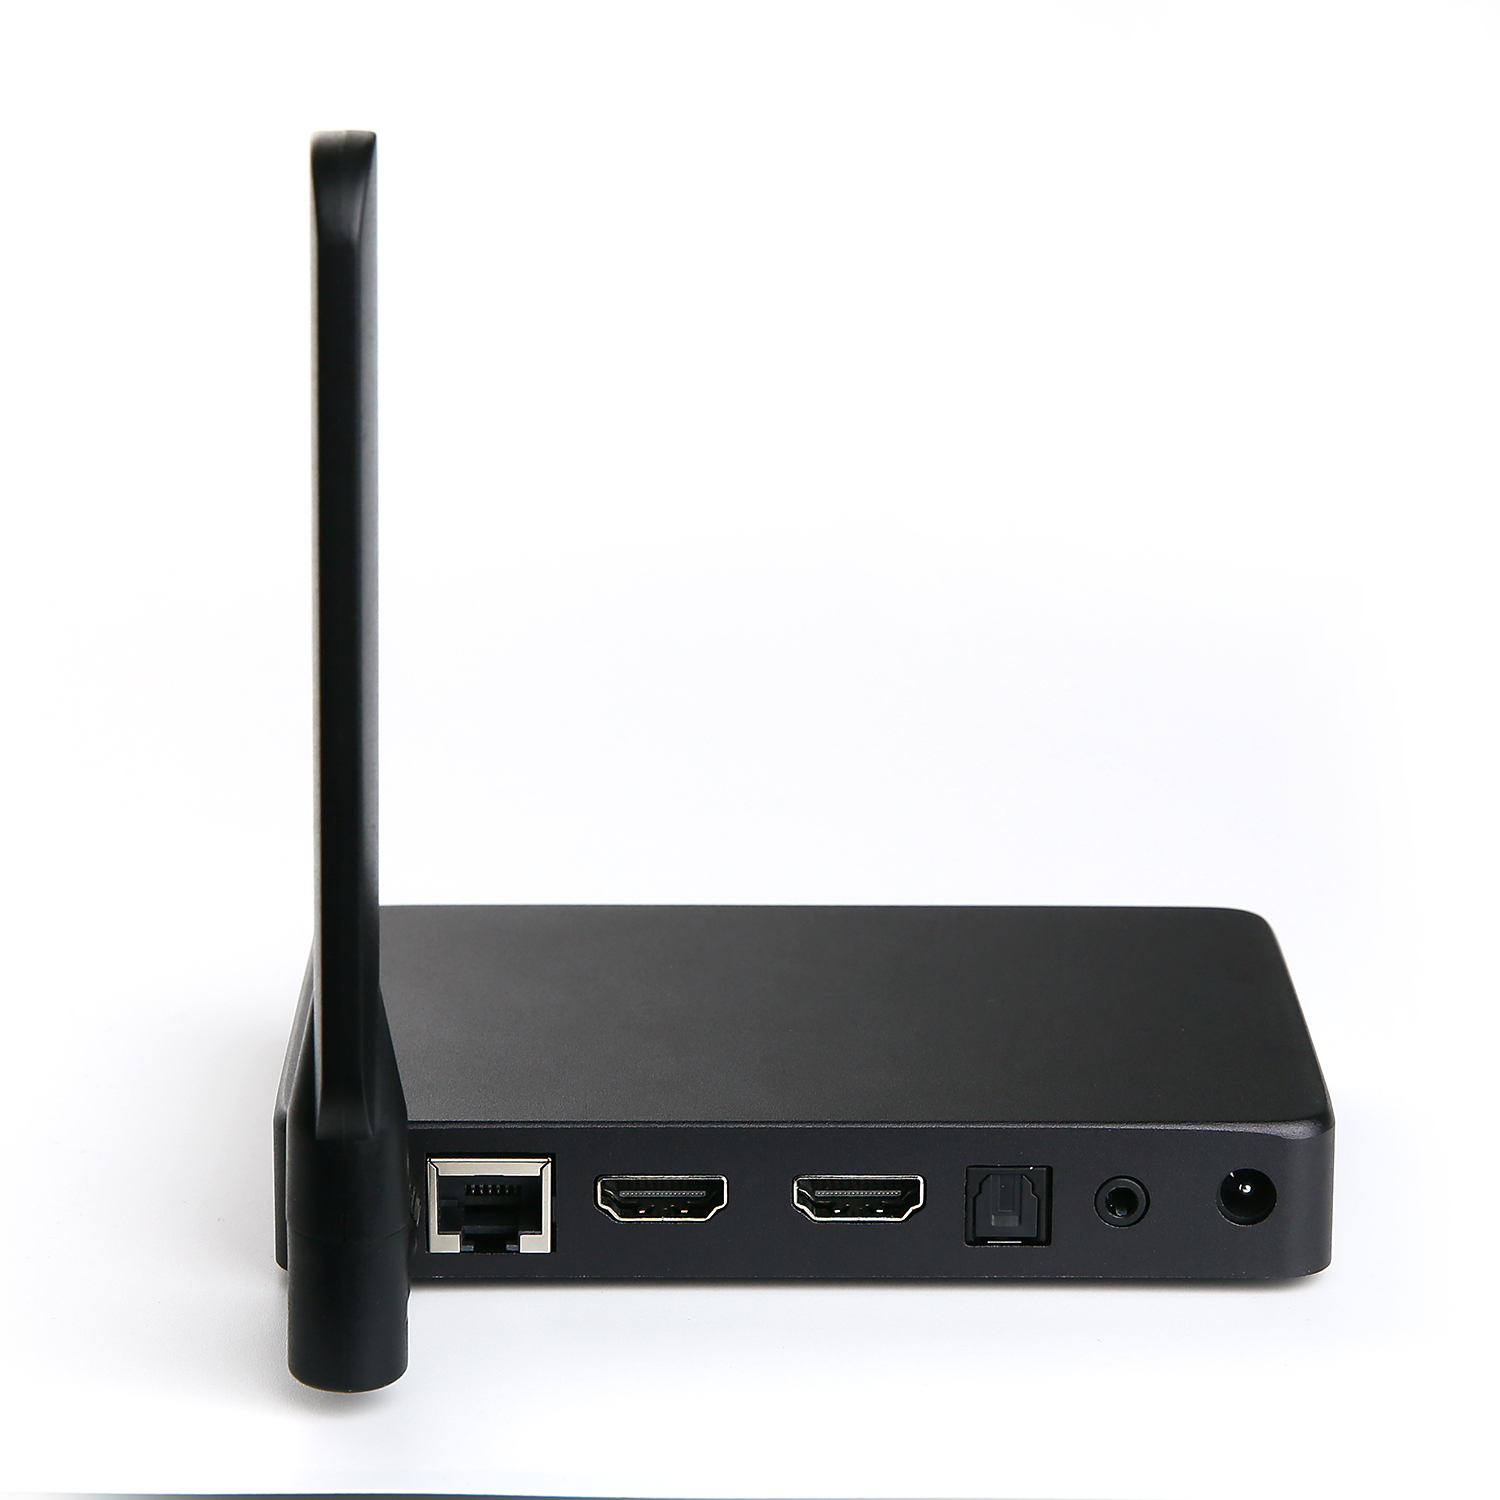 mini pc hdmi android Realtek RTD1295, best android mini pc hdmi input,Android dongle hdmi input